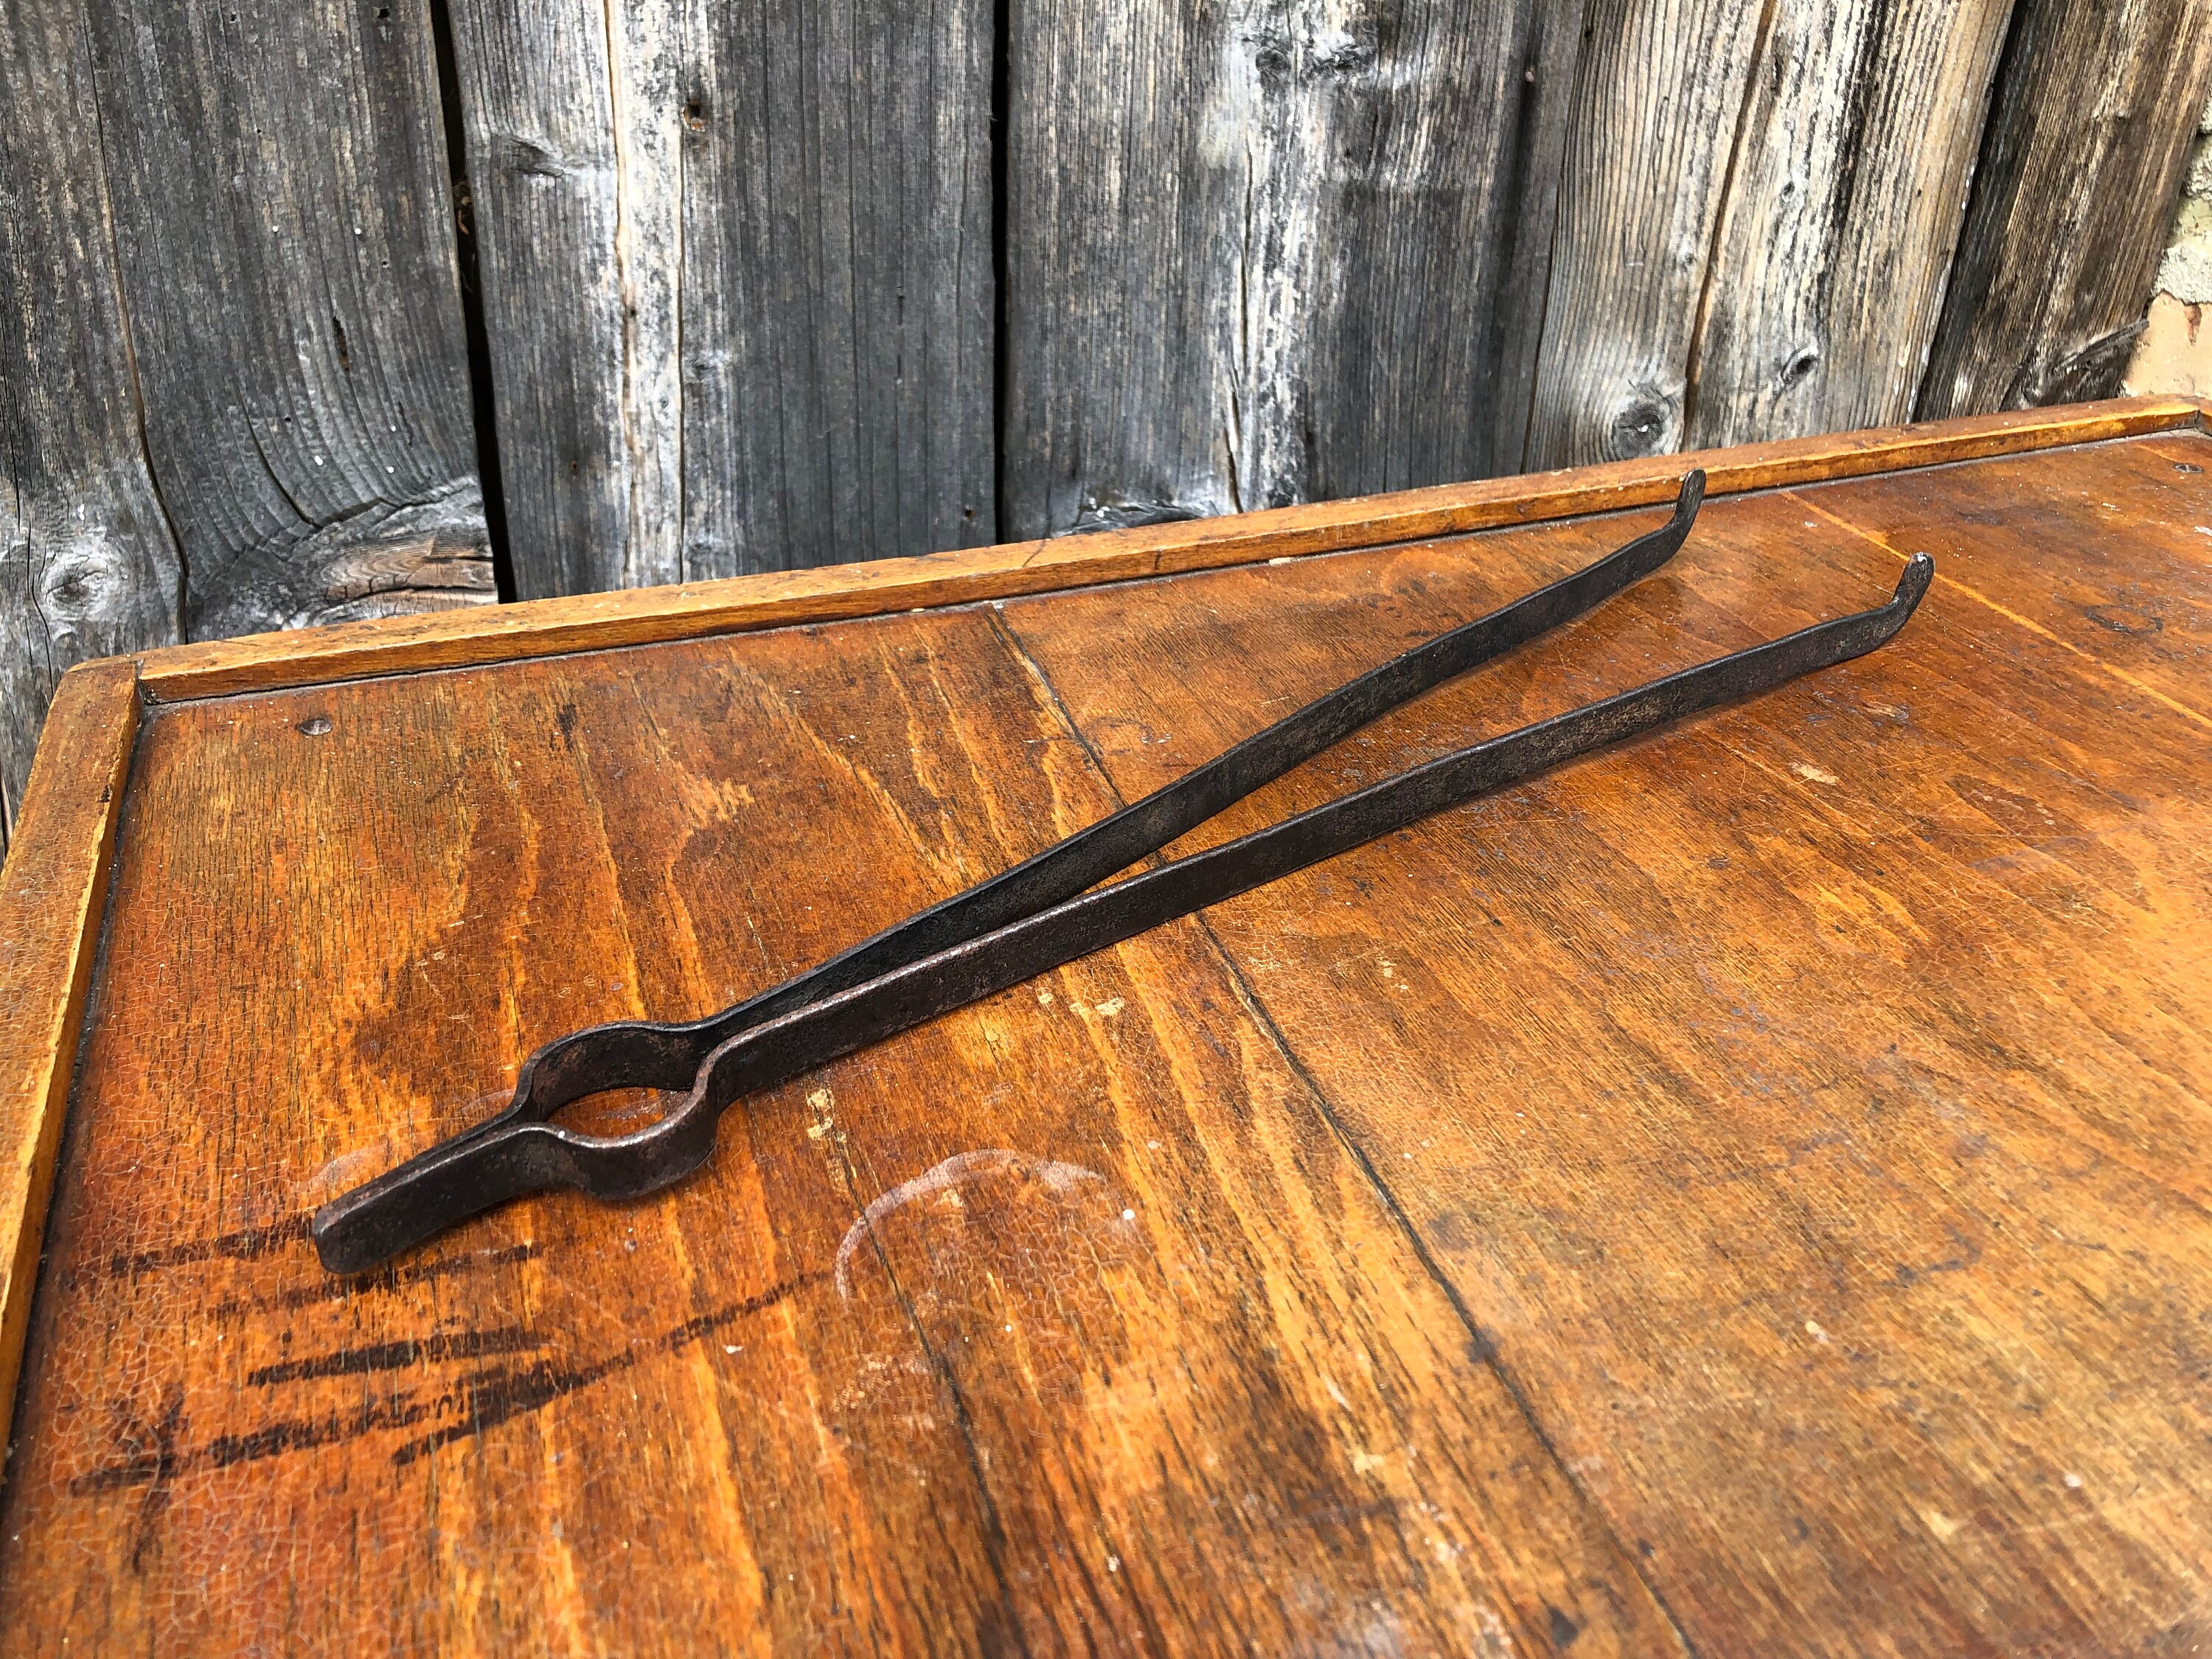 Apocalypse Tongs All-Purpose Fire Tongs, Fire Pit Tongs, Campfire Tongs, Charcoal Tongs, Fireplace Tongs, Dutch Oven Cooking 